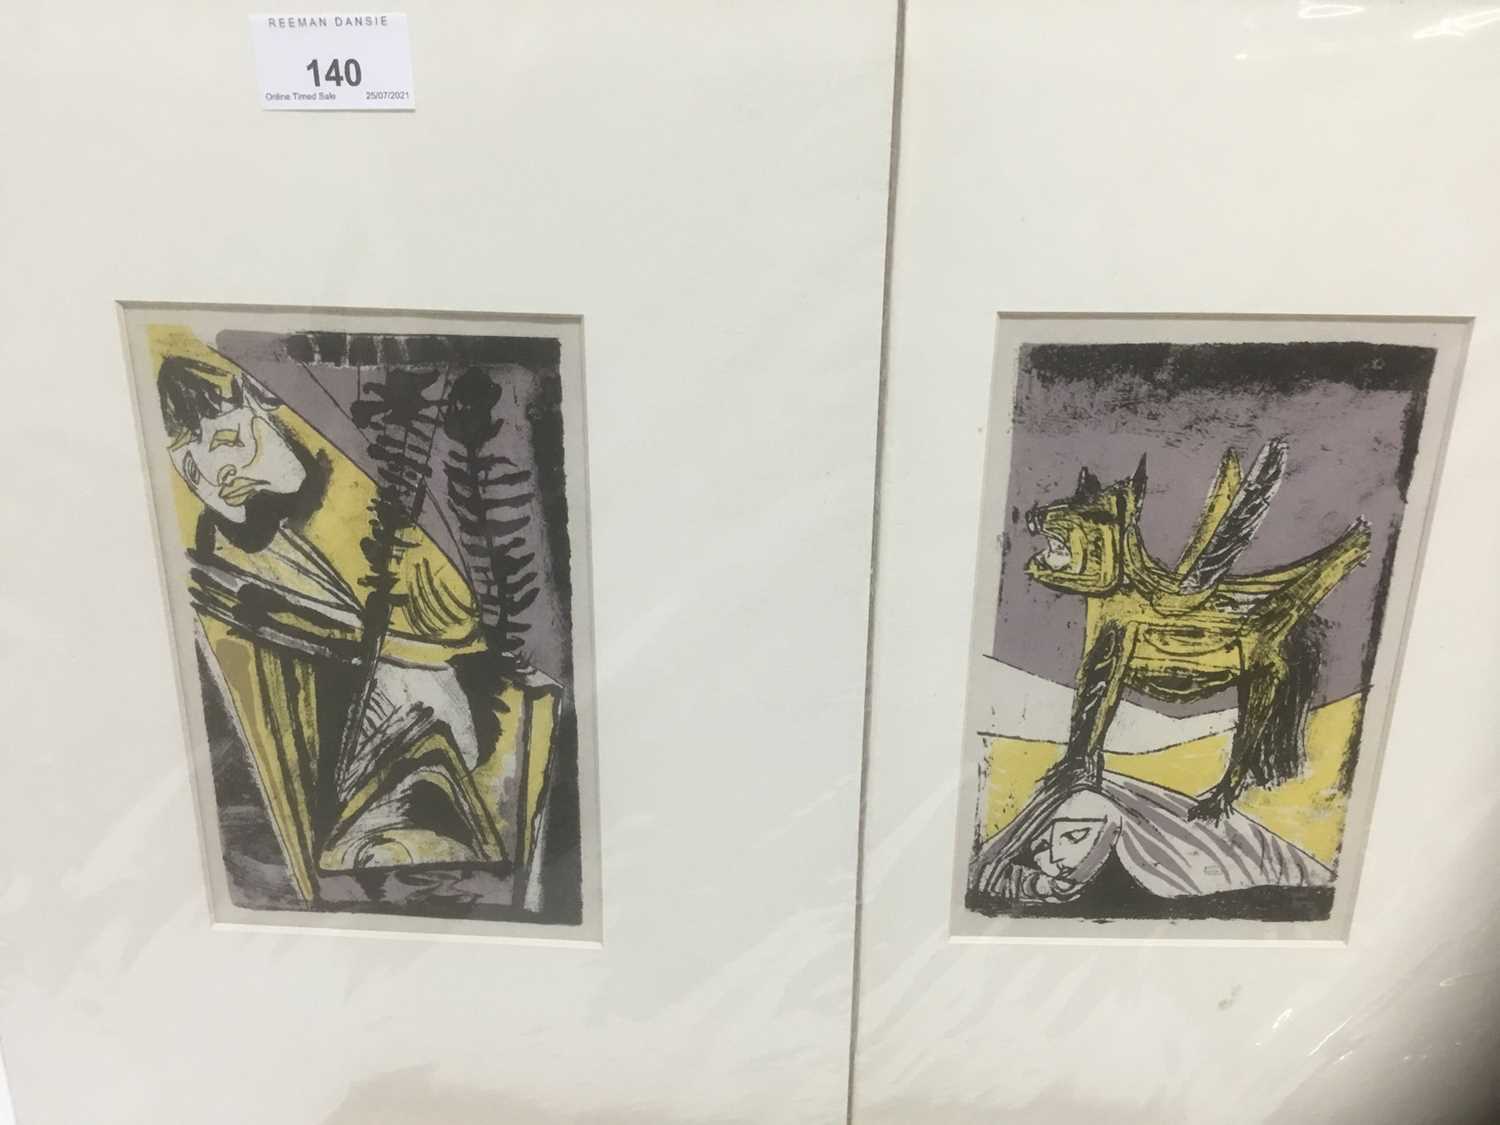 Lot 140 - Robert Colquhoun, pair of lithographs from Poems of Sleep and Dream, mounted, 19cm x 12cm